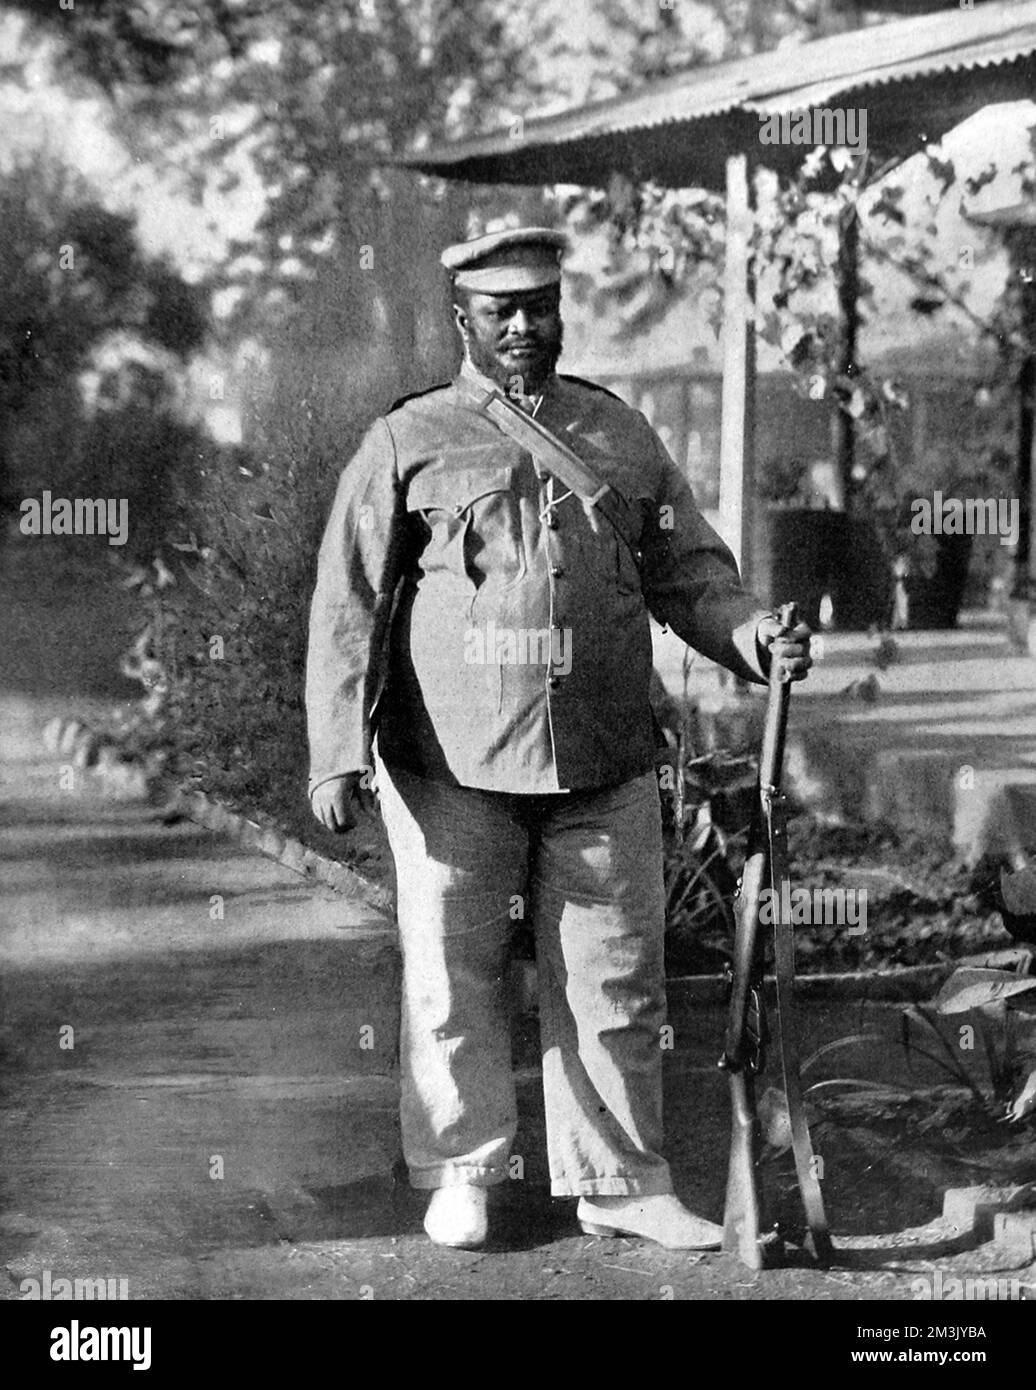 The turbulent son of a turbulent father. During a period of great instability in South Africa, Dinuzlu was associated with Zulu anti-British fighting and was imprisoned and exiled in St Helena.     Date: 1907 Stock Photo